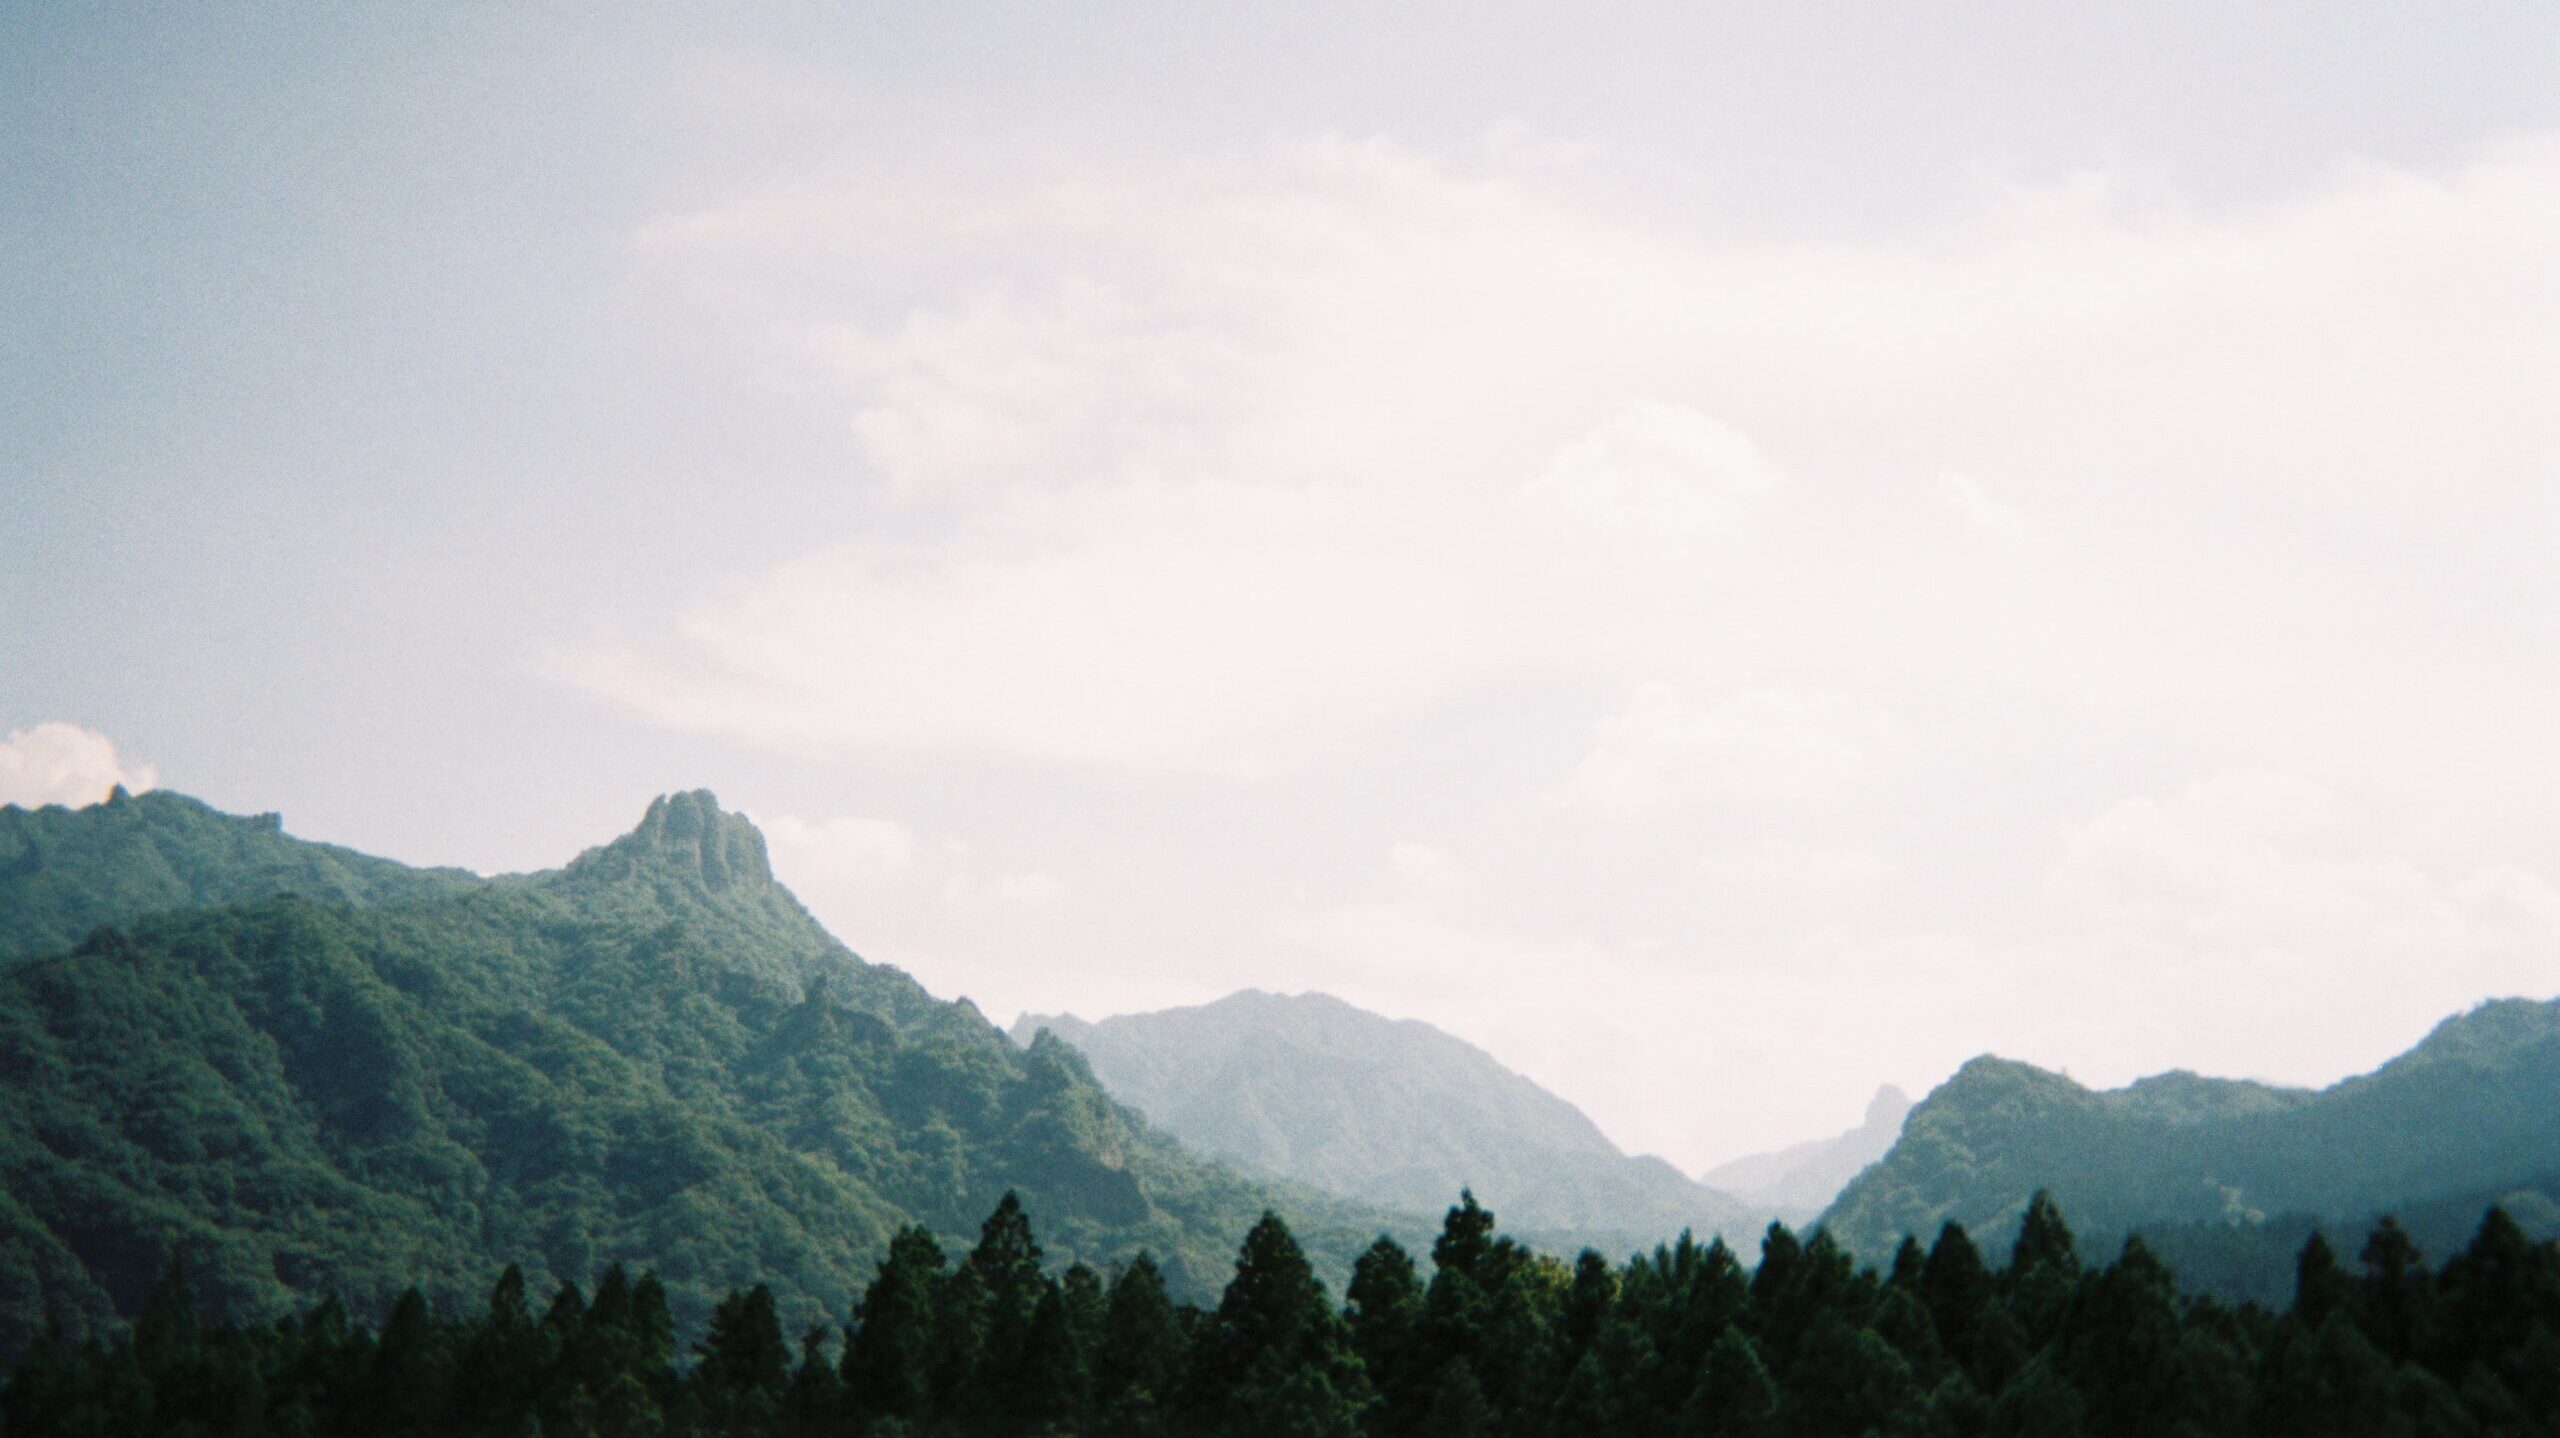 A mountain range on a humid summer's day in Nagano, Japan.